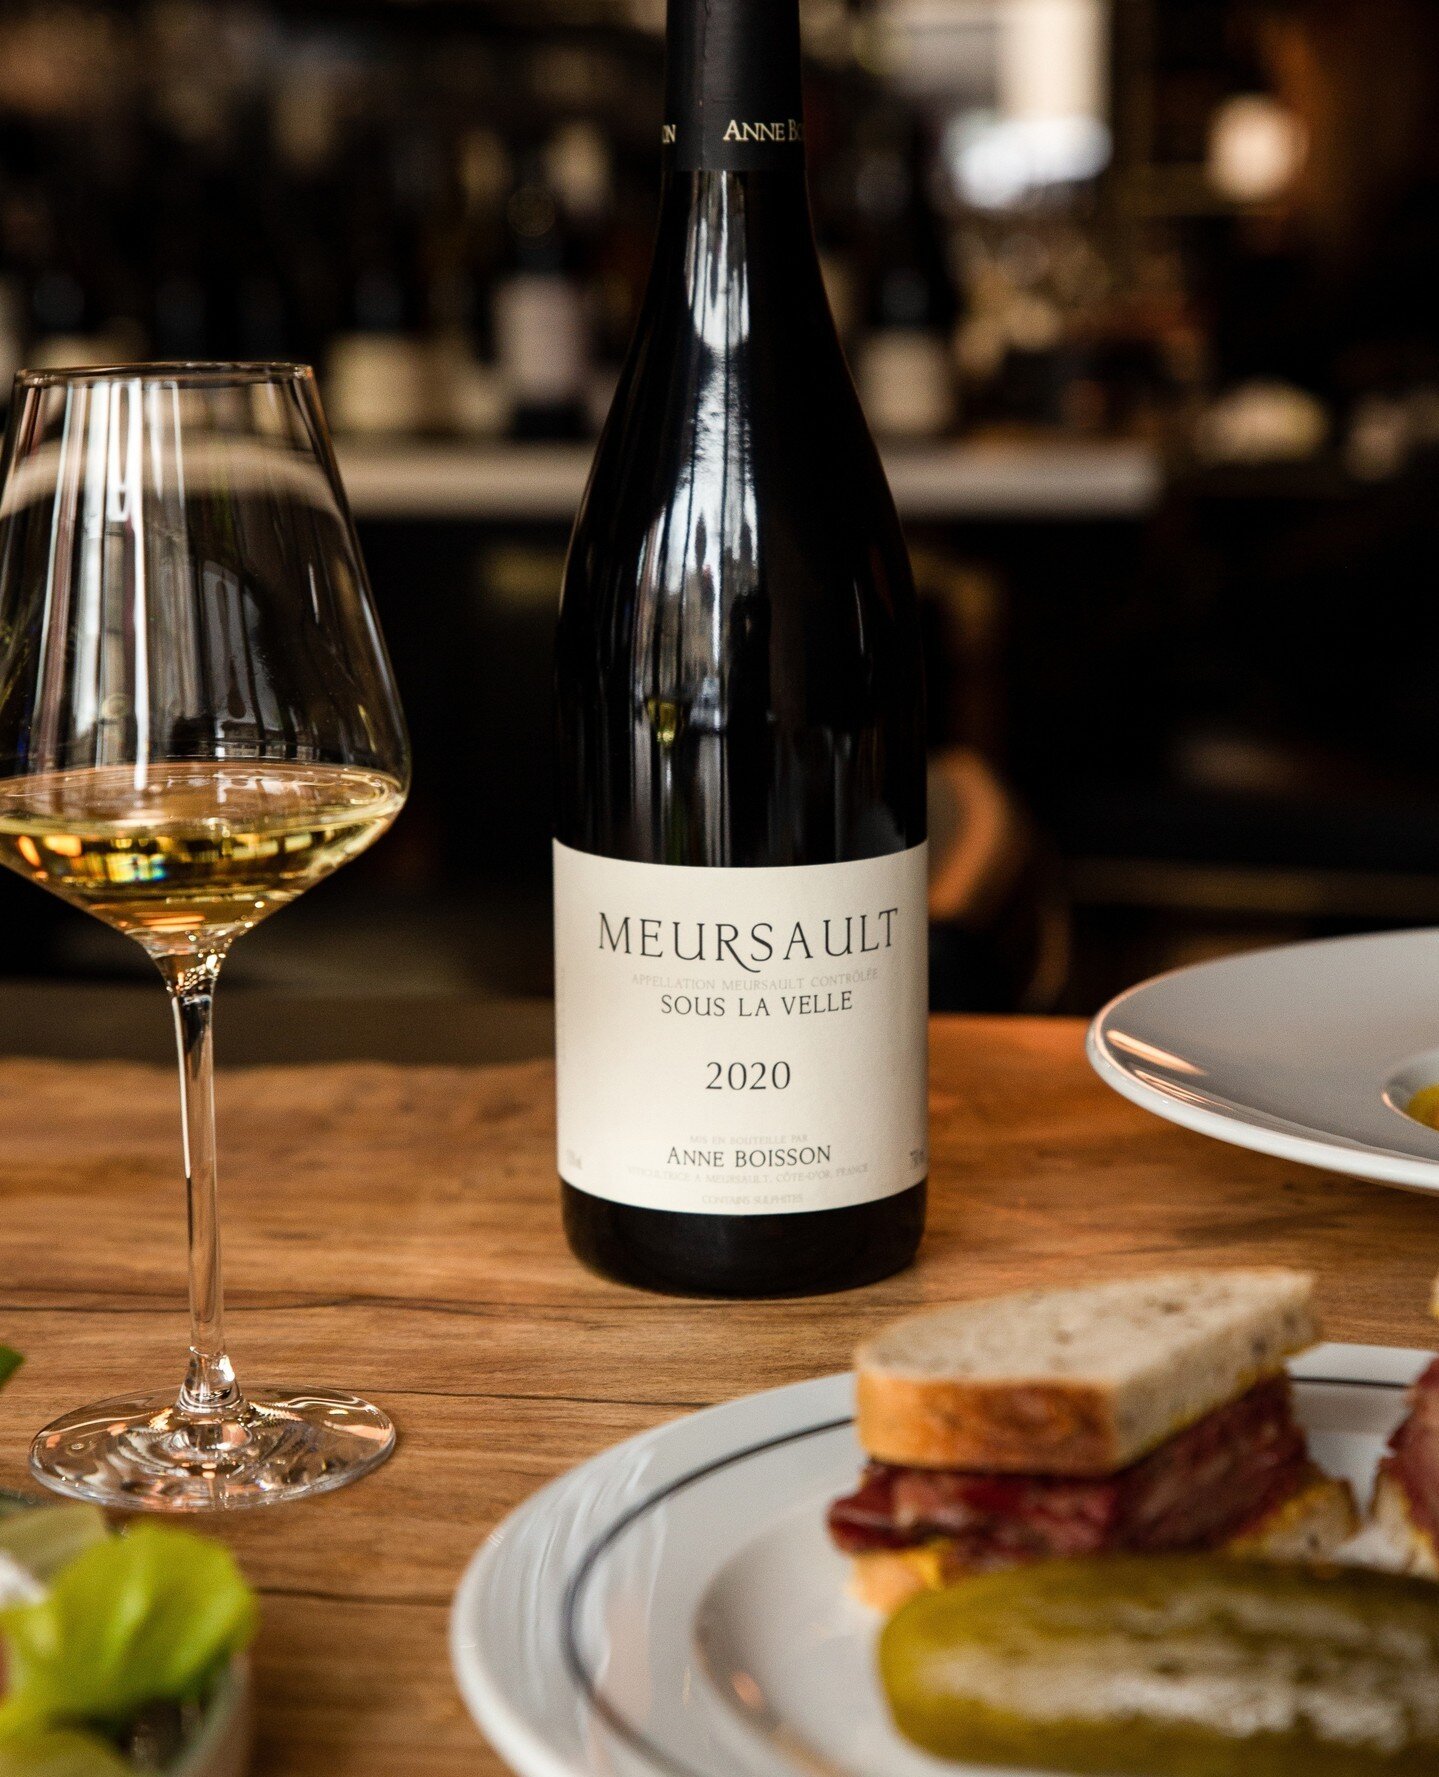 For a truly unique experience, come and discover all that our Provenance Wine Bar has to offer.  Amazing food and drinks await!⁠
⁠
⁠
⁠
Open 4pm to 10pm ⁠
Wednesday to Saturday⁠
⁠
Book your table on our website, link in bio!⁠
⁠
See you there!⁠
⁠
⁠
⁠
#